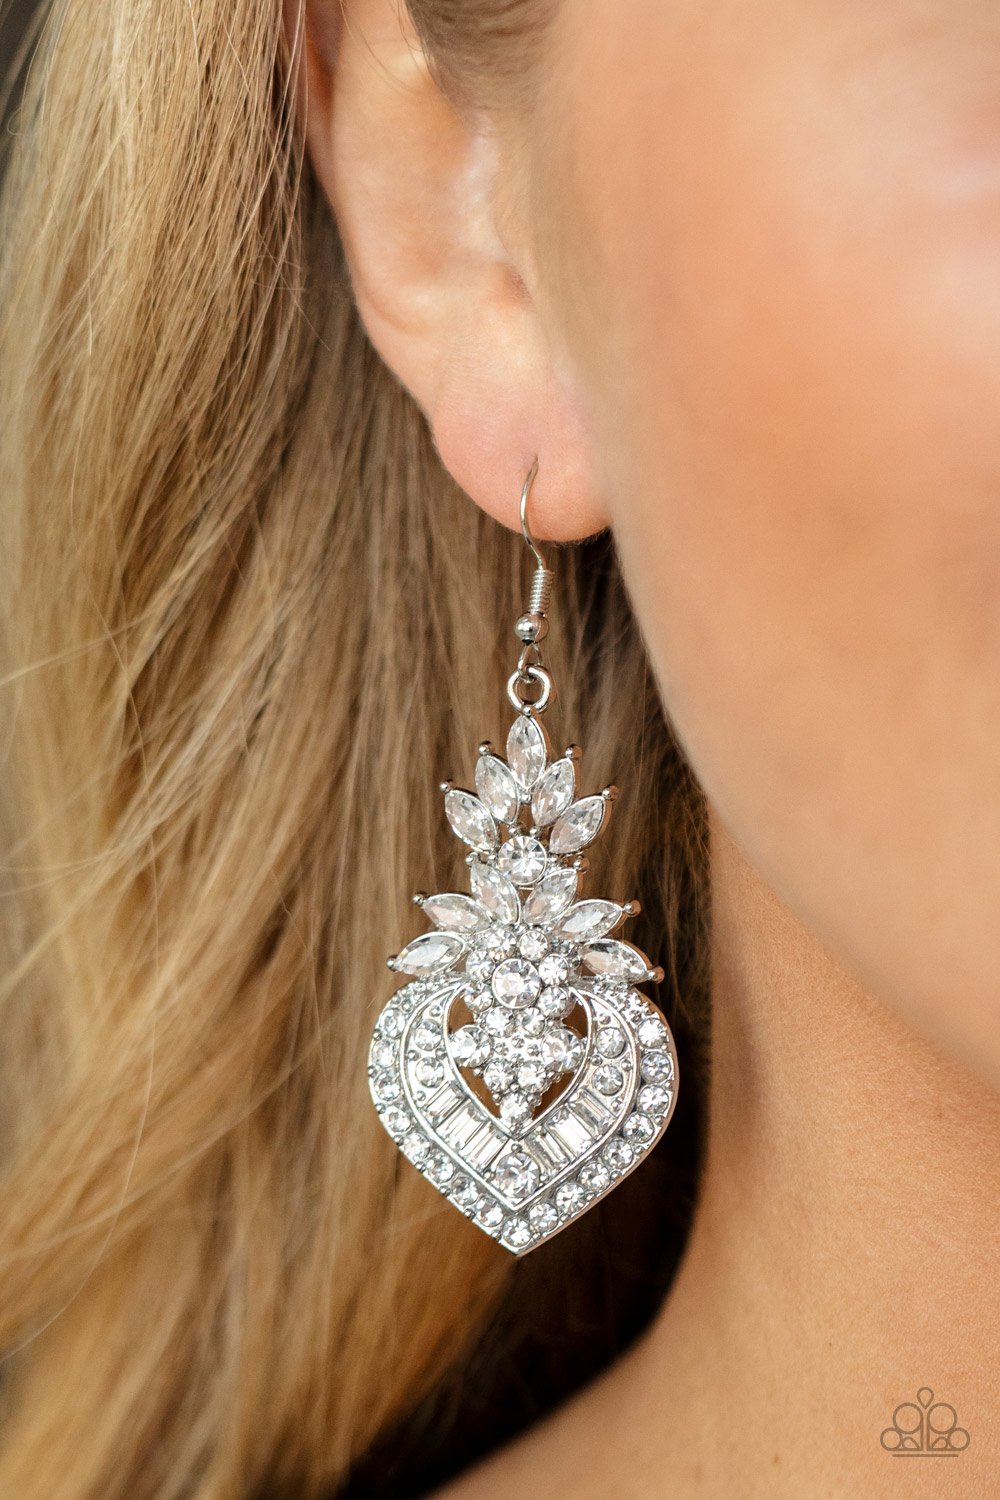 Paparazzi Accessories - Royal Hustle - White (Bling) Earrings